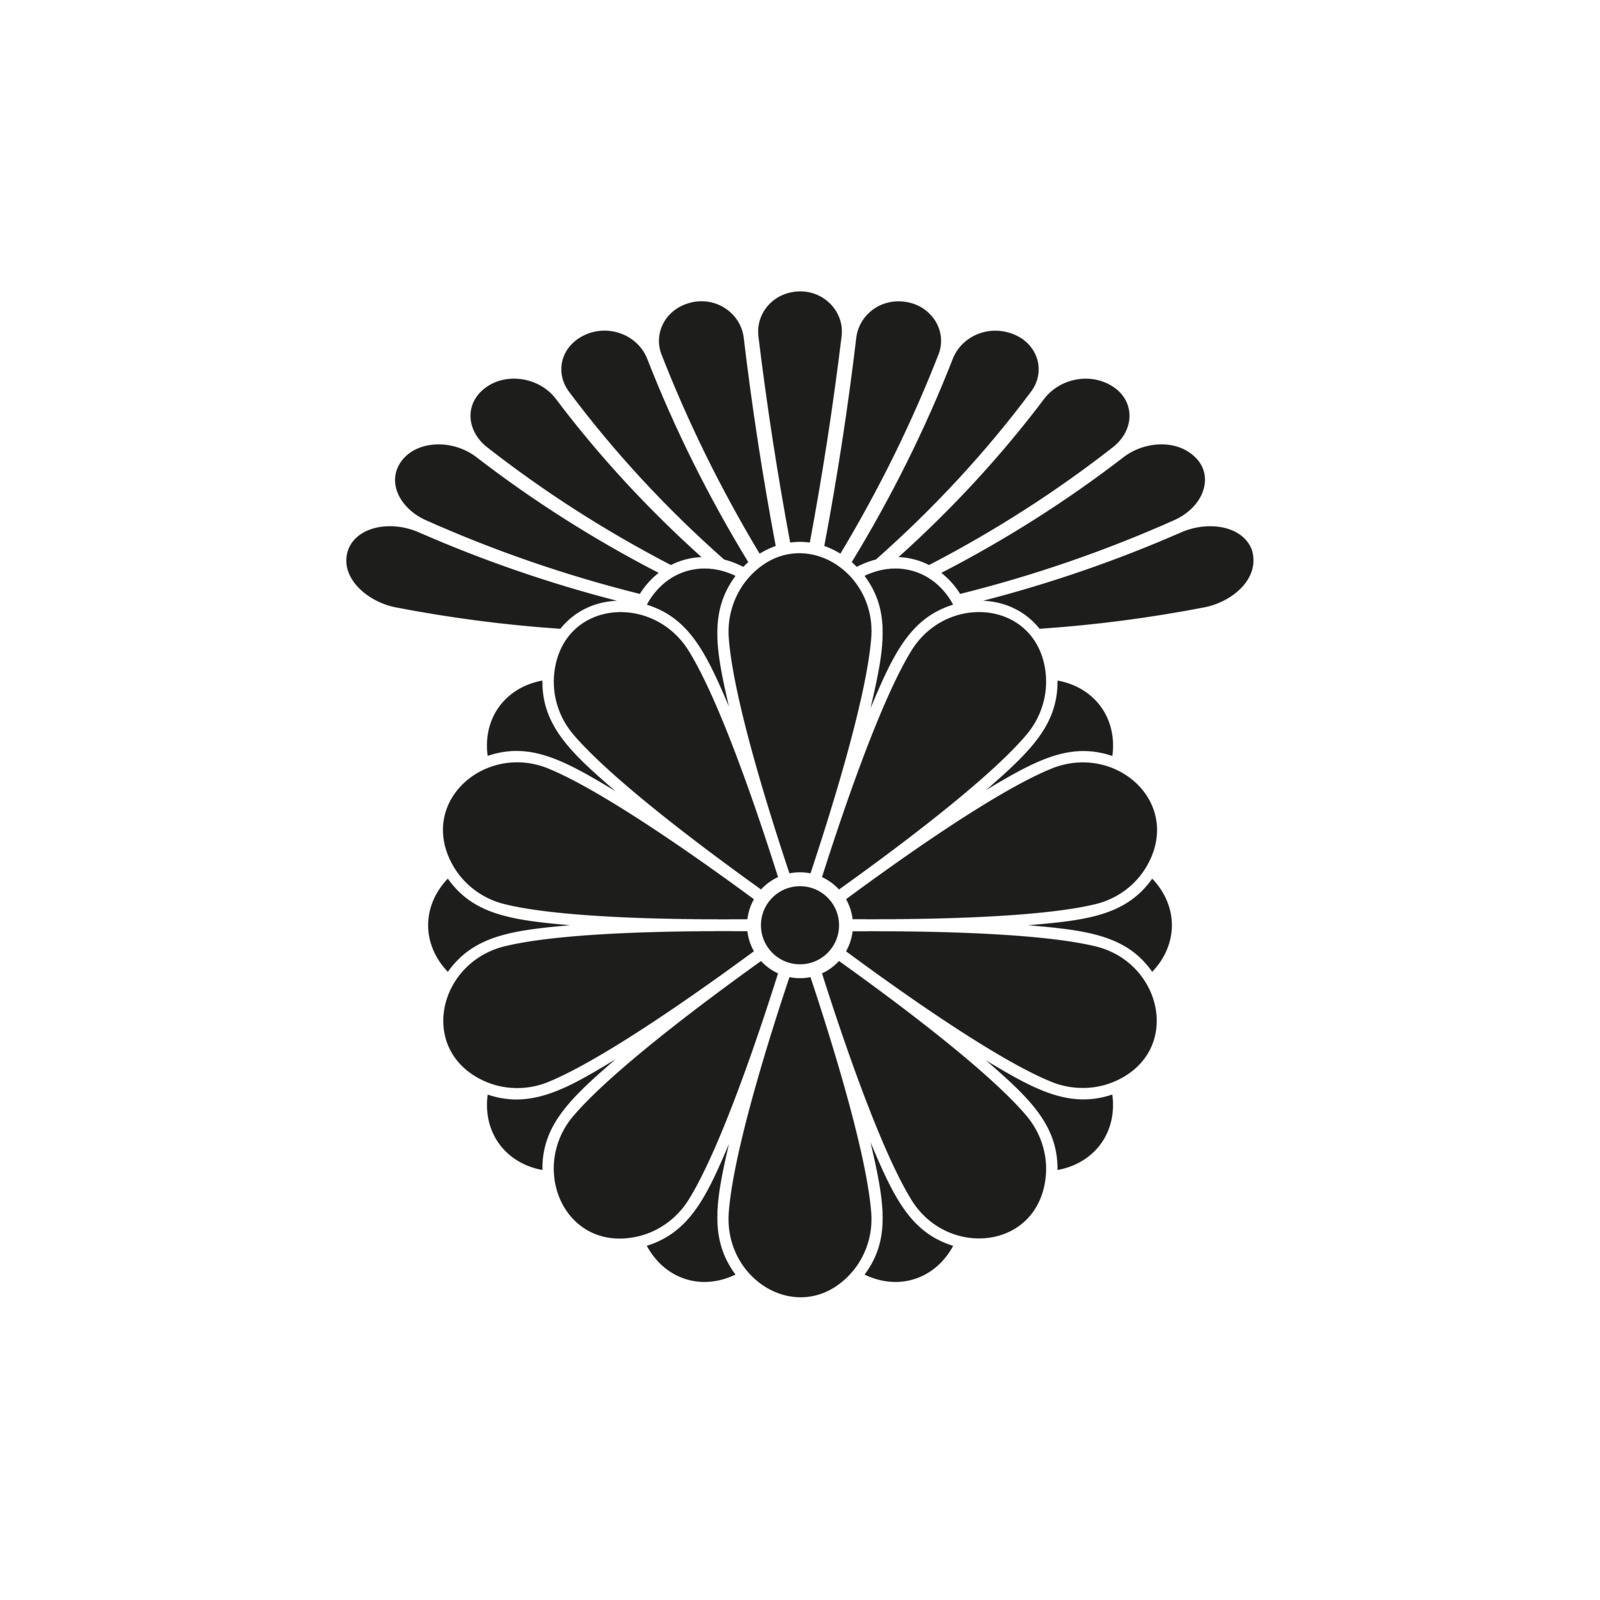 Japanese style design flower Sign, Royal symbol by infinityyy